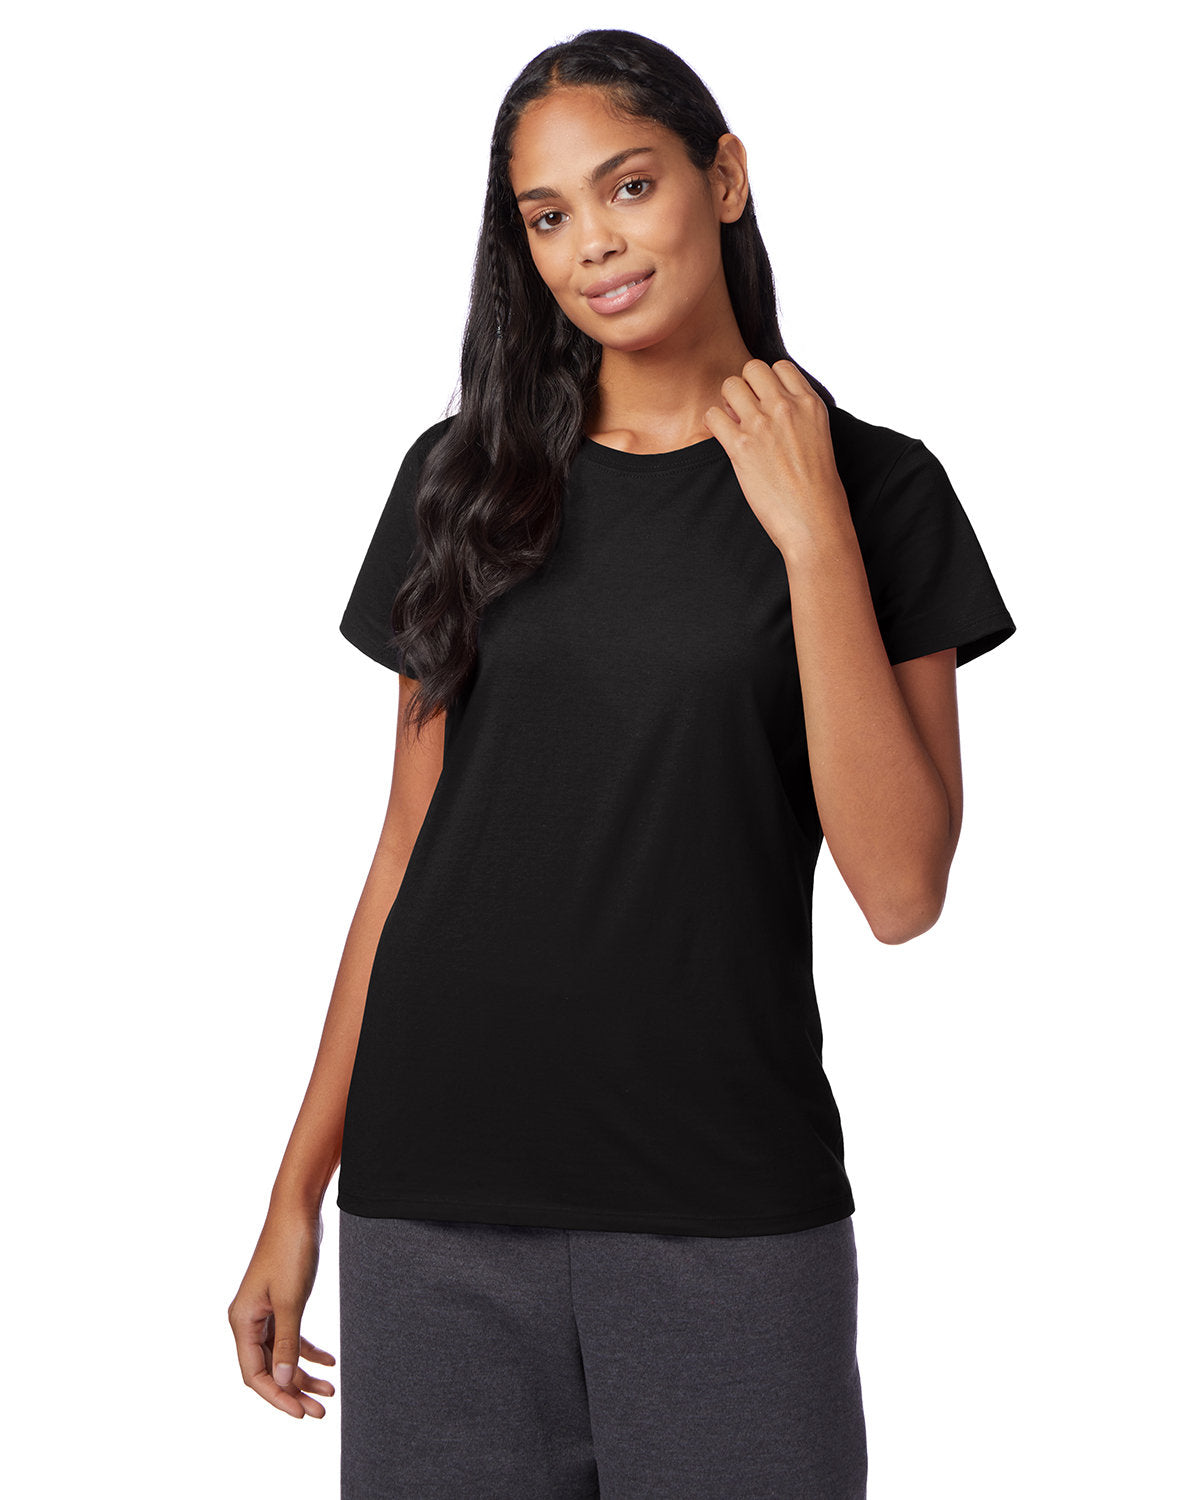 ELEVATE-YOUR-STYLE-WITH-THE-HANES-LADIES-PERFECT-T-T-SHIRT